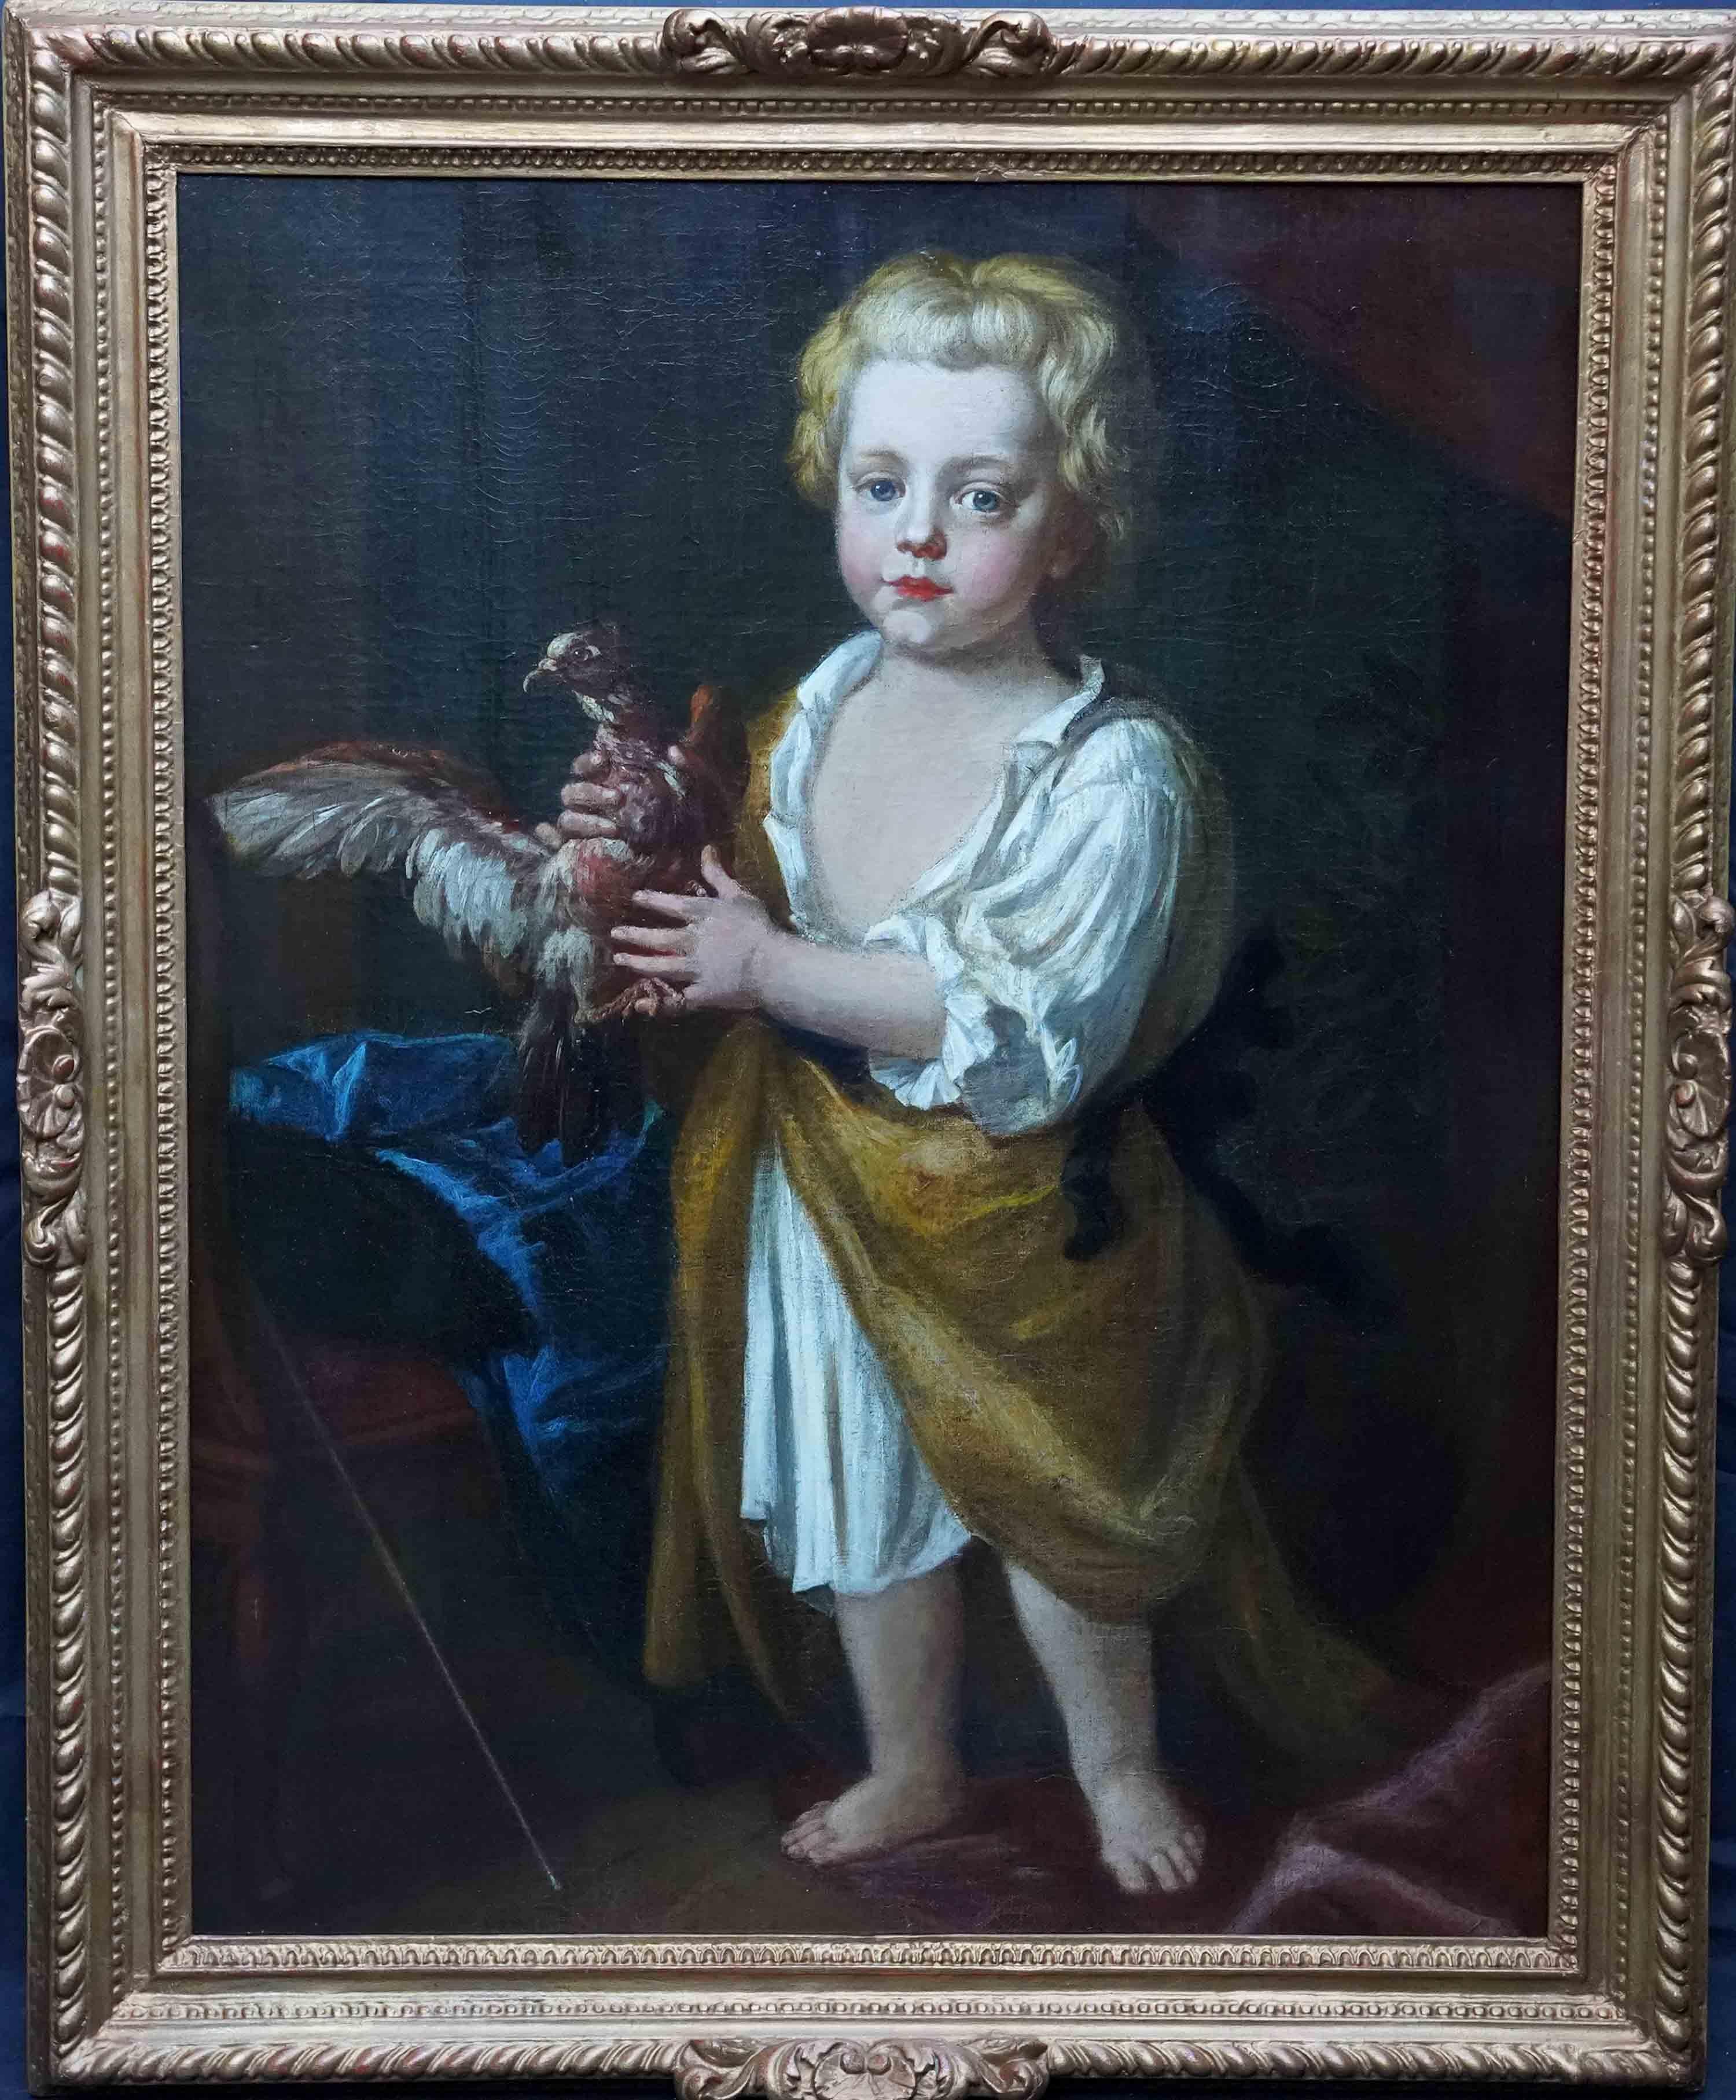 Godfrey Kneller Animal Painting - Portrait of a Boy with Bird - British 17th century art Old Master oil painting